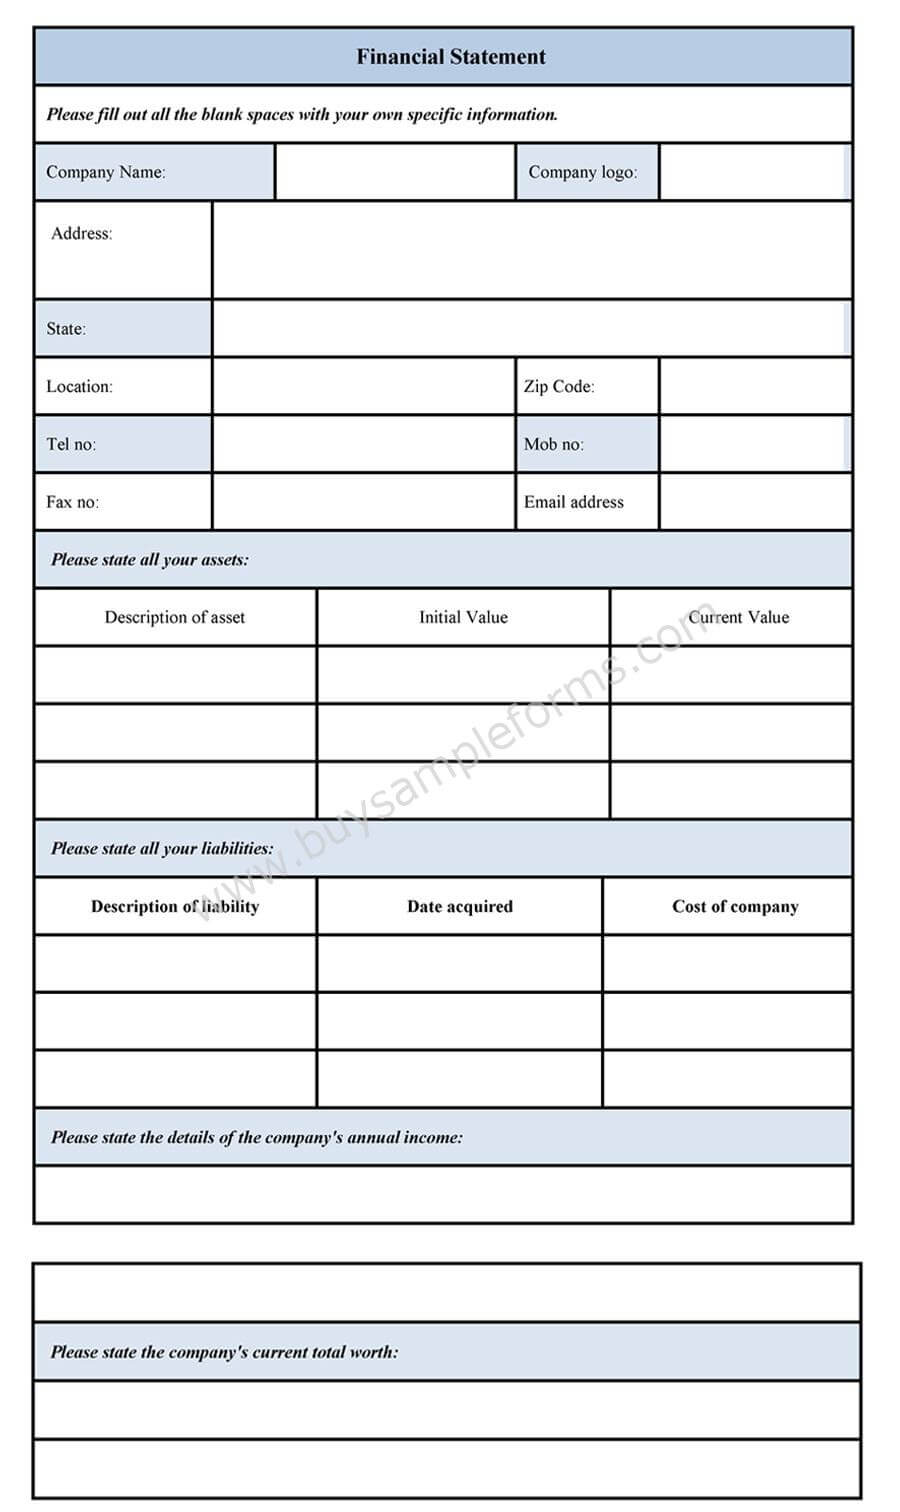 Personal Financial Statement Template Blank Form Sample Intended For Blank Personal Financial Statement Template